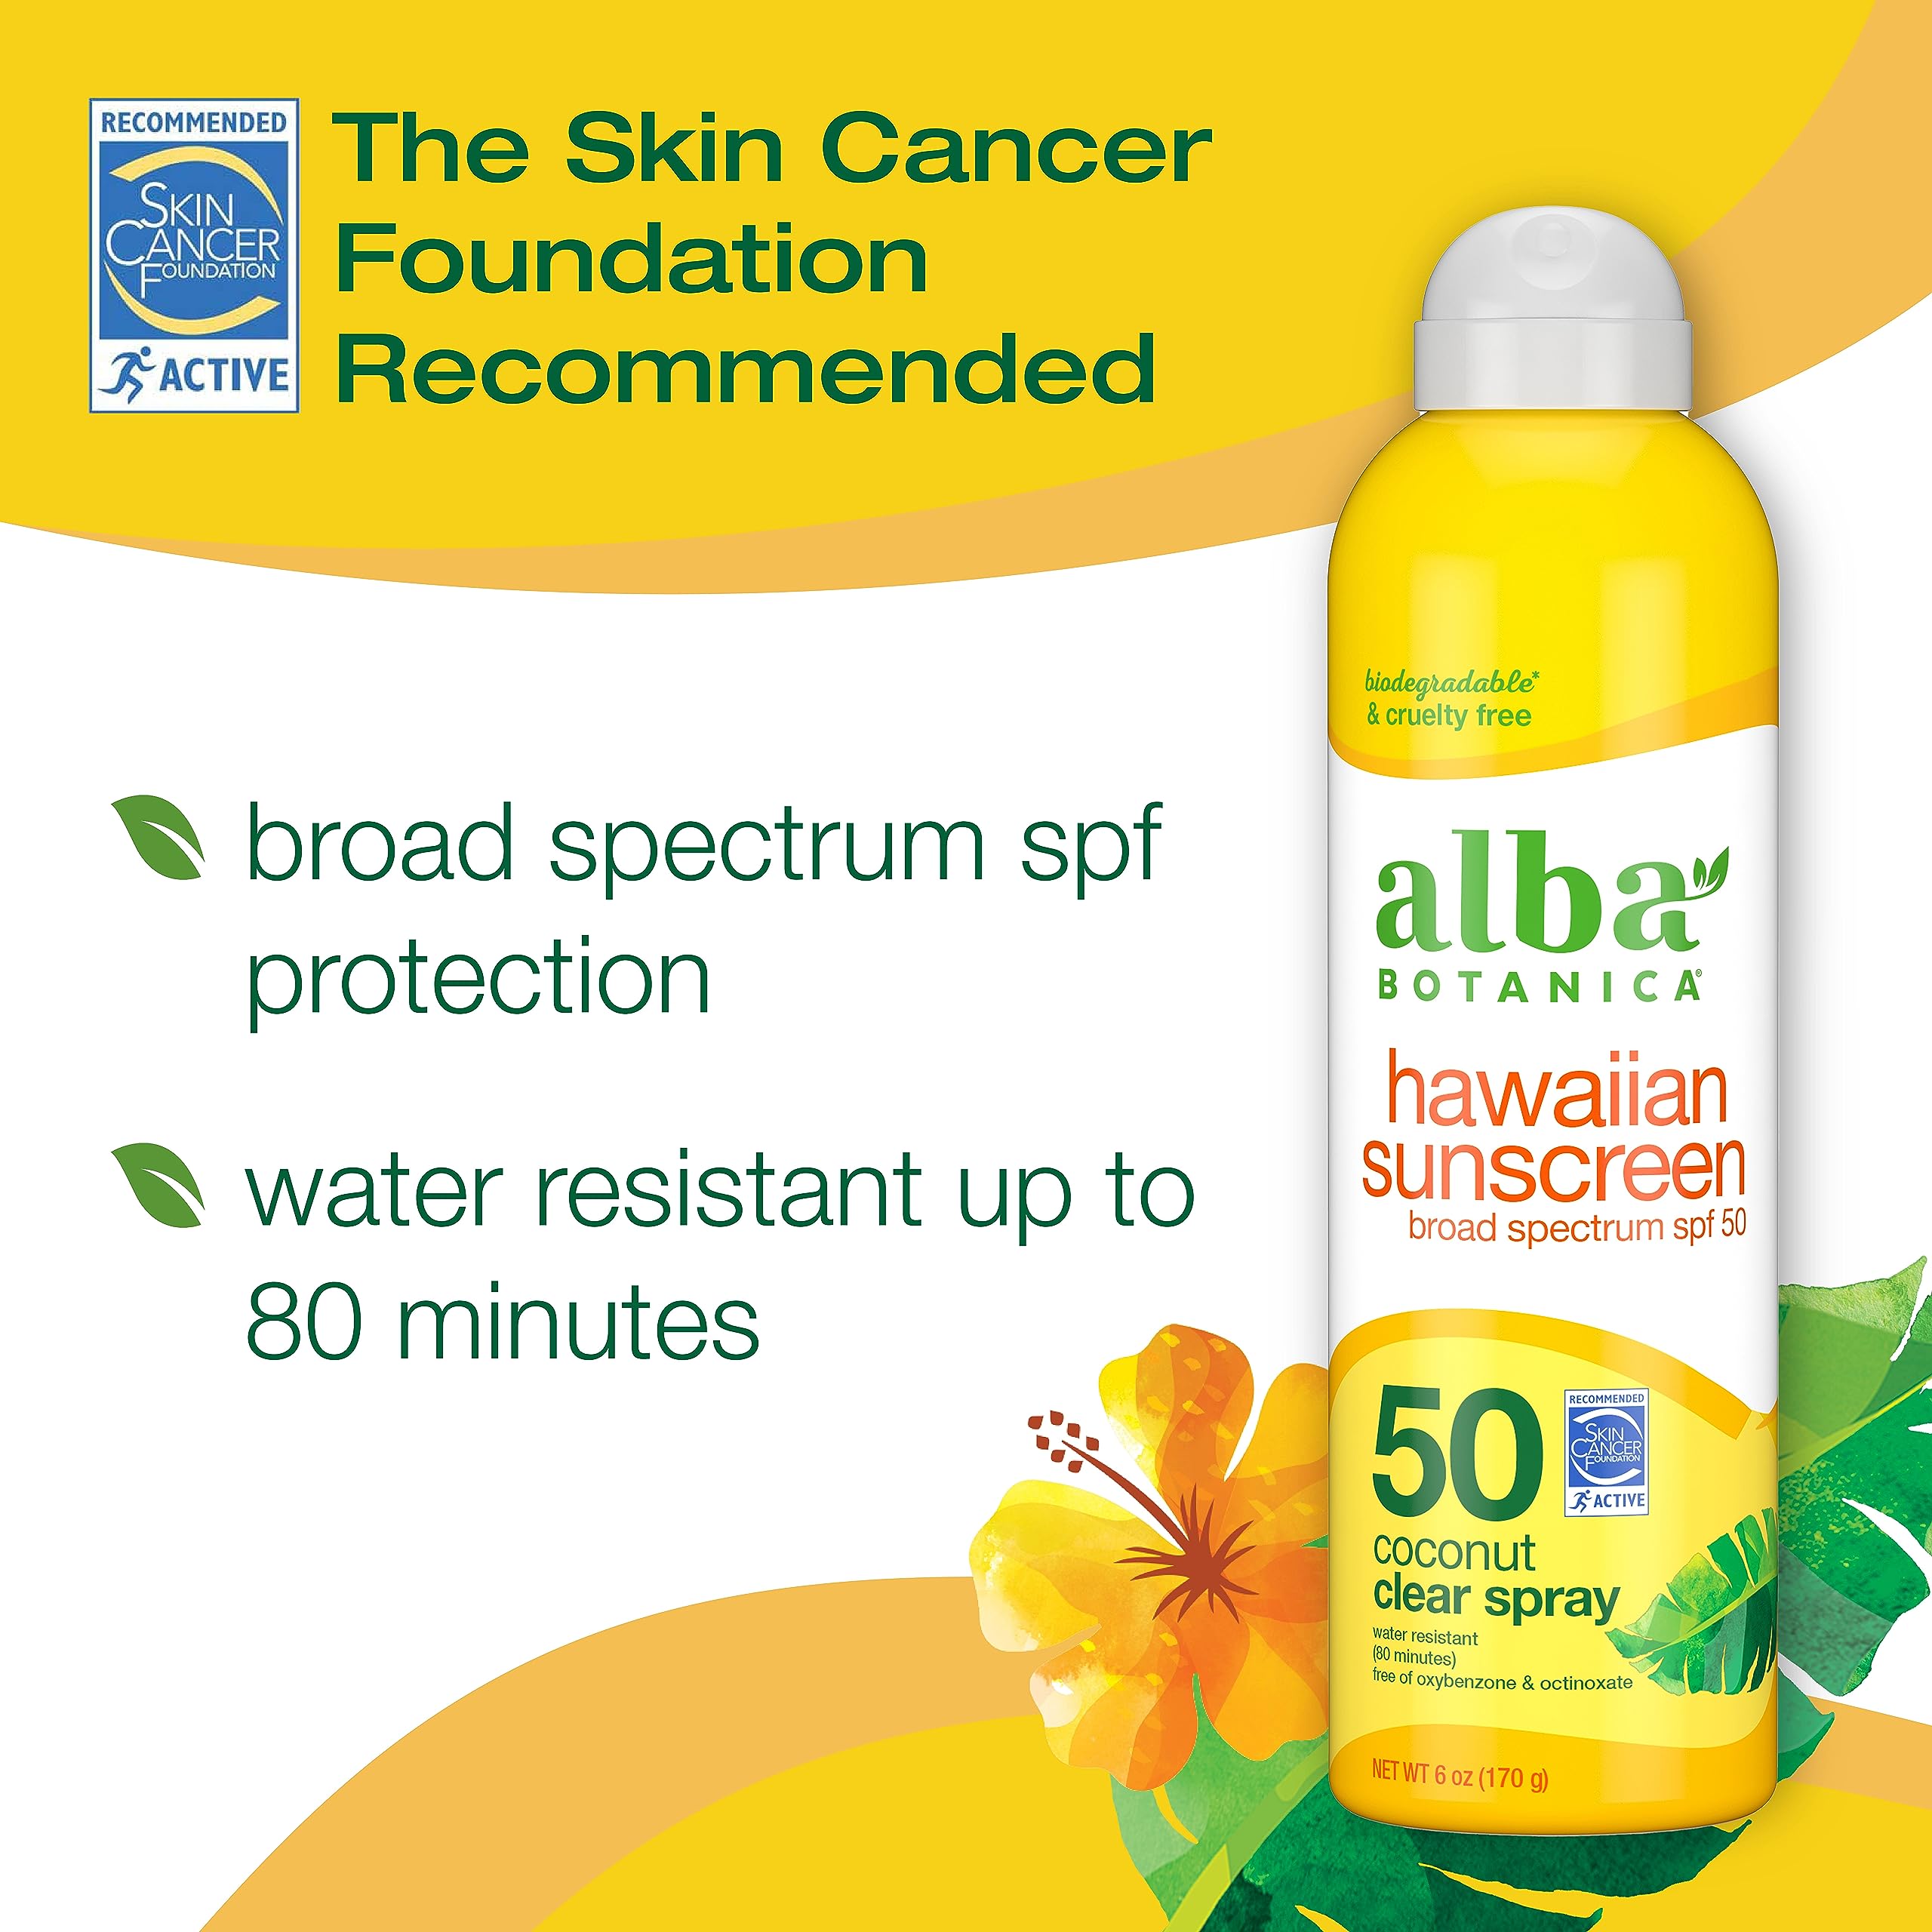 Alba Botanica Sunscreen for Face and Body, Hawaiian Coconut Sunscreen Spray, Broad Spectrum SPF 50 Sunscreen, Water Resistant and Biodegradable, 6 fl. oz. Bottle